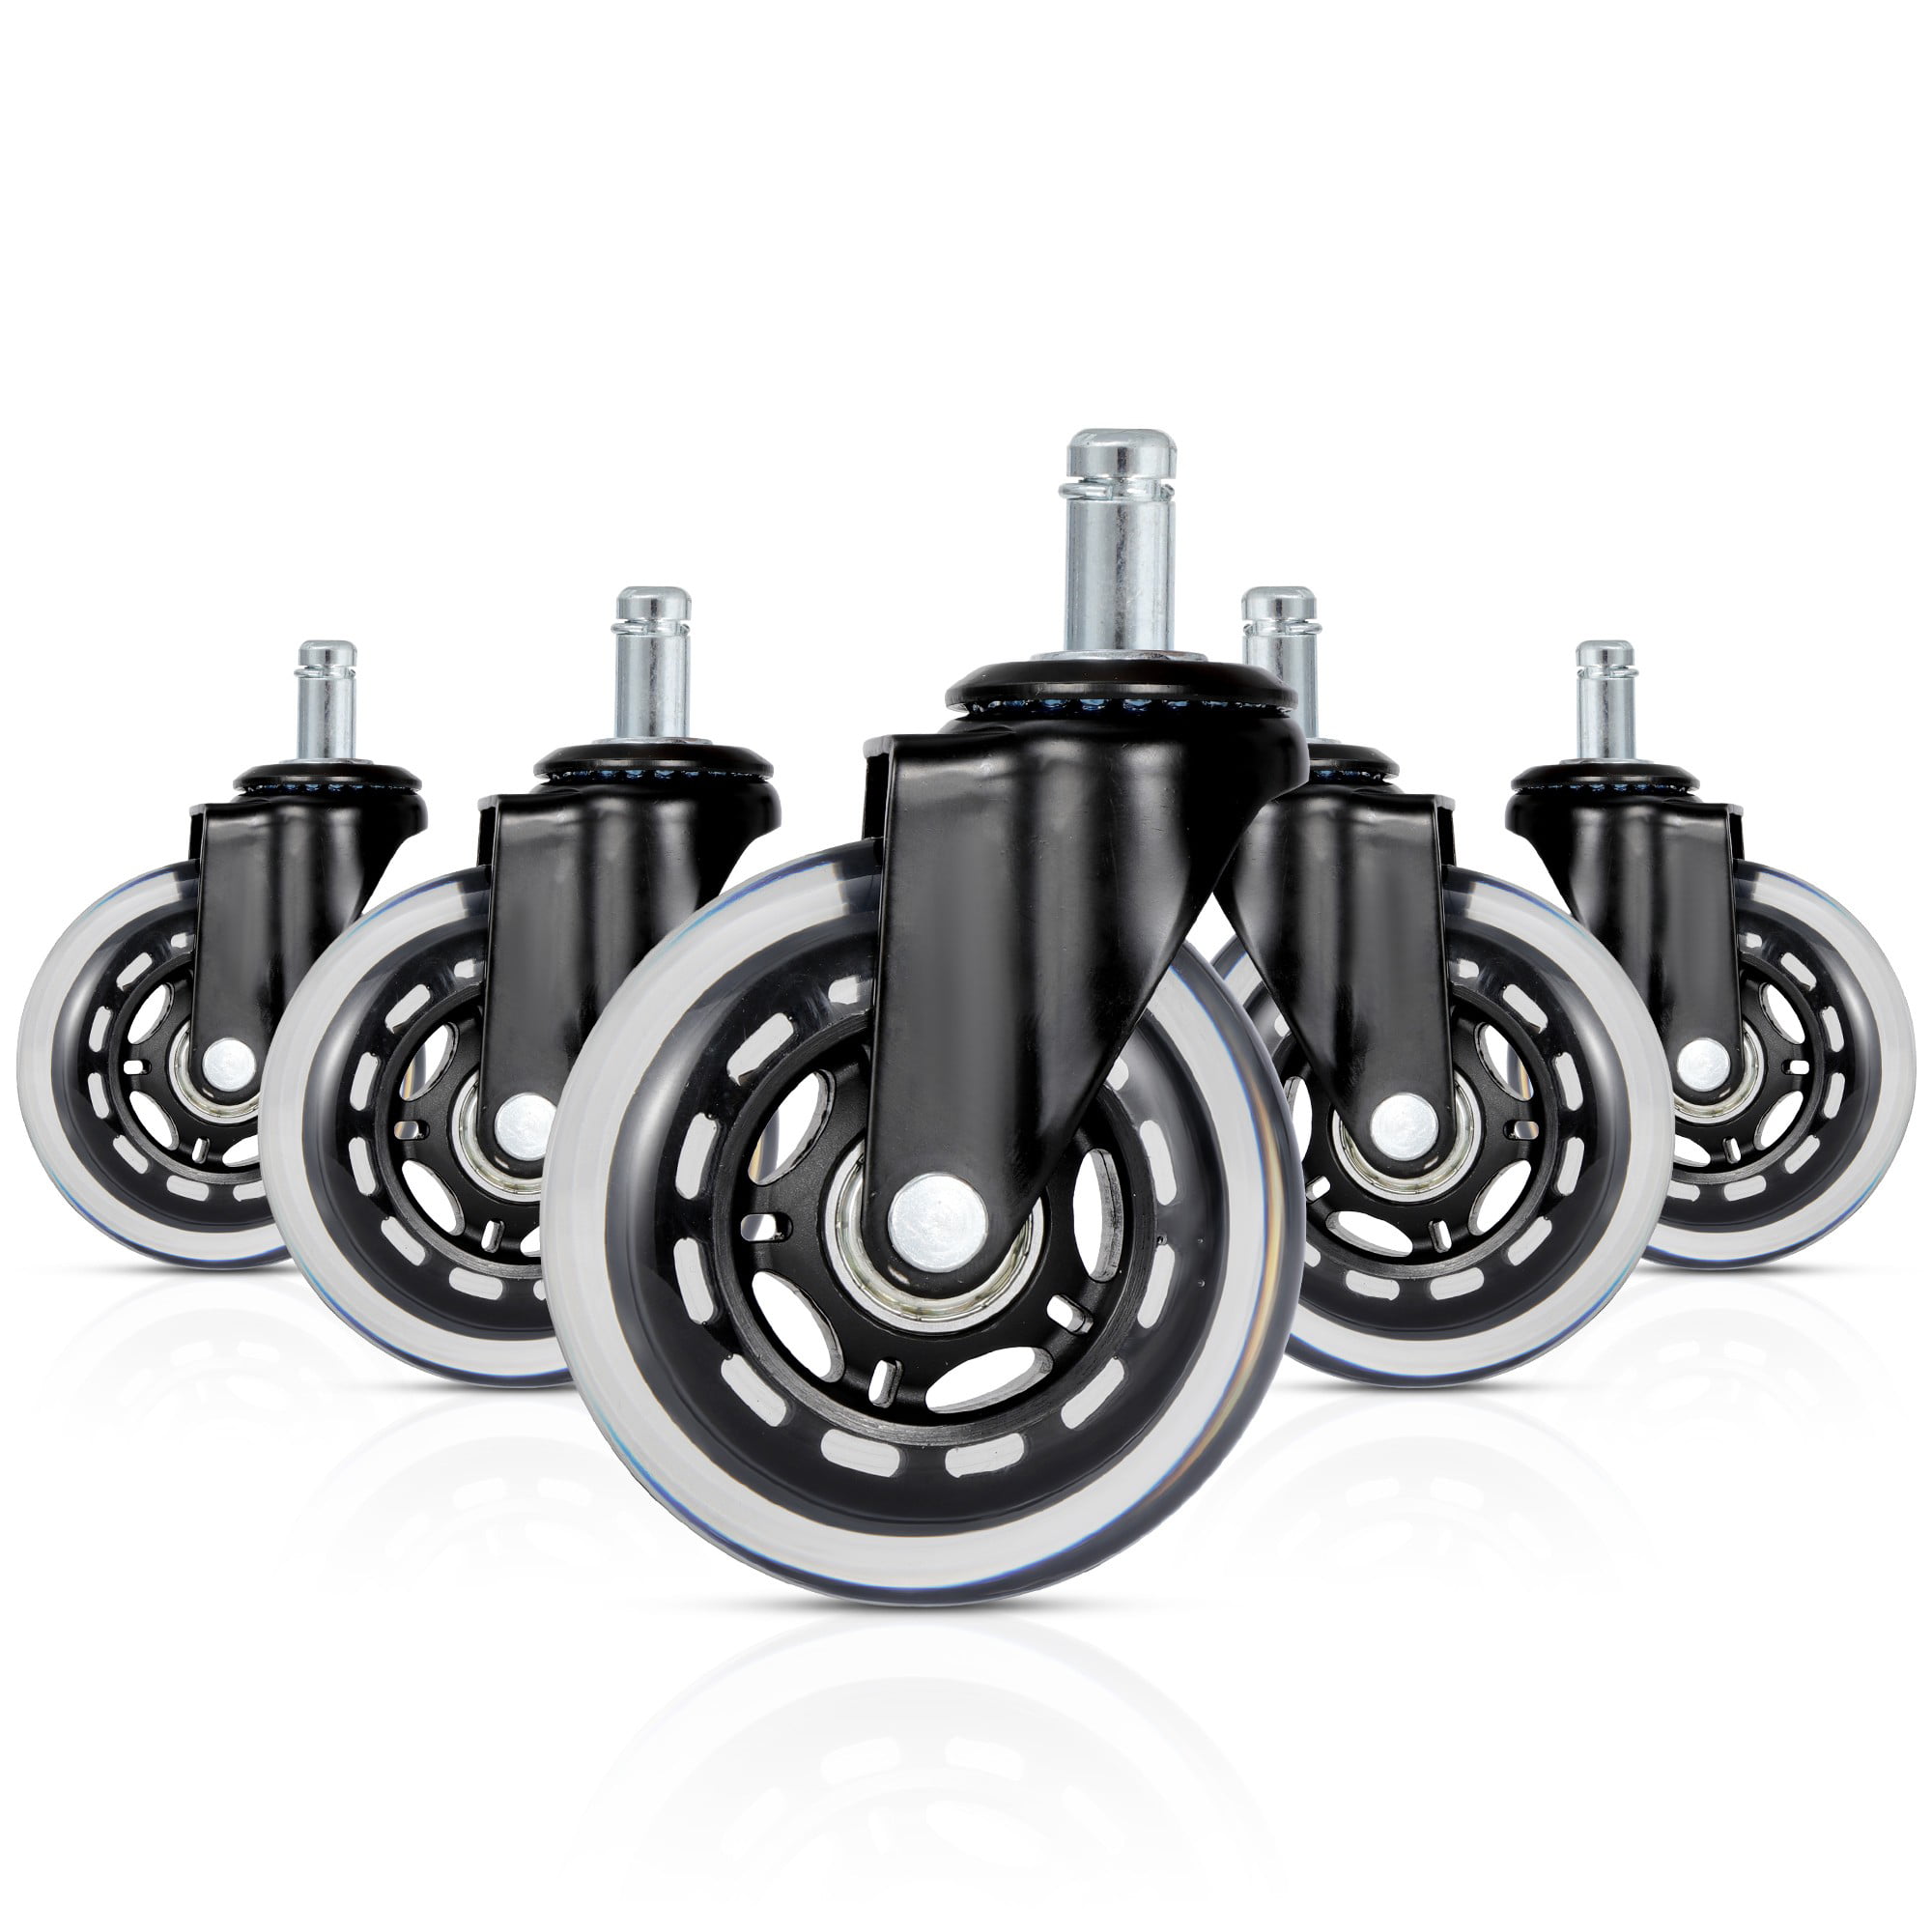 Office Chair Wheels Rollerblade Casters, Chair Rollers For Hardwood Floors